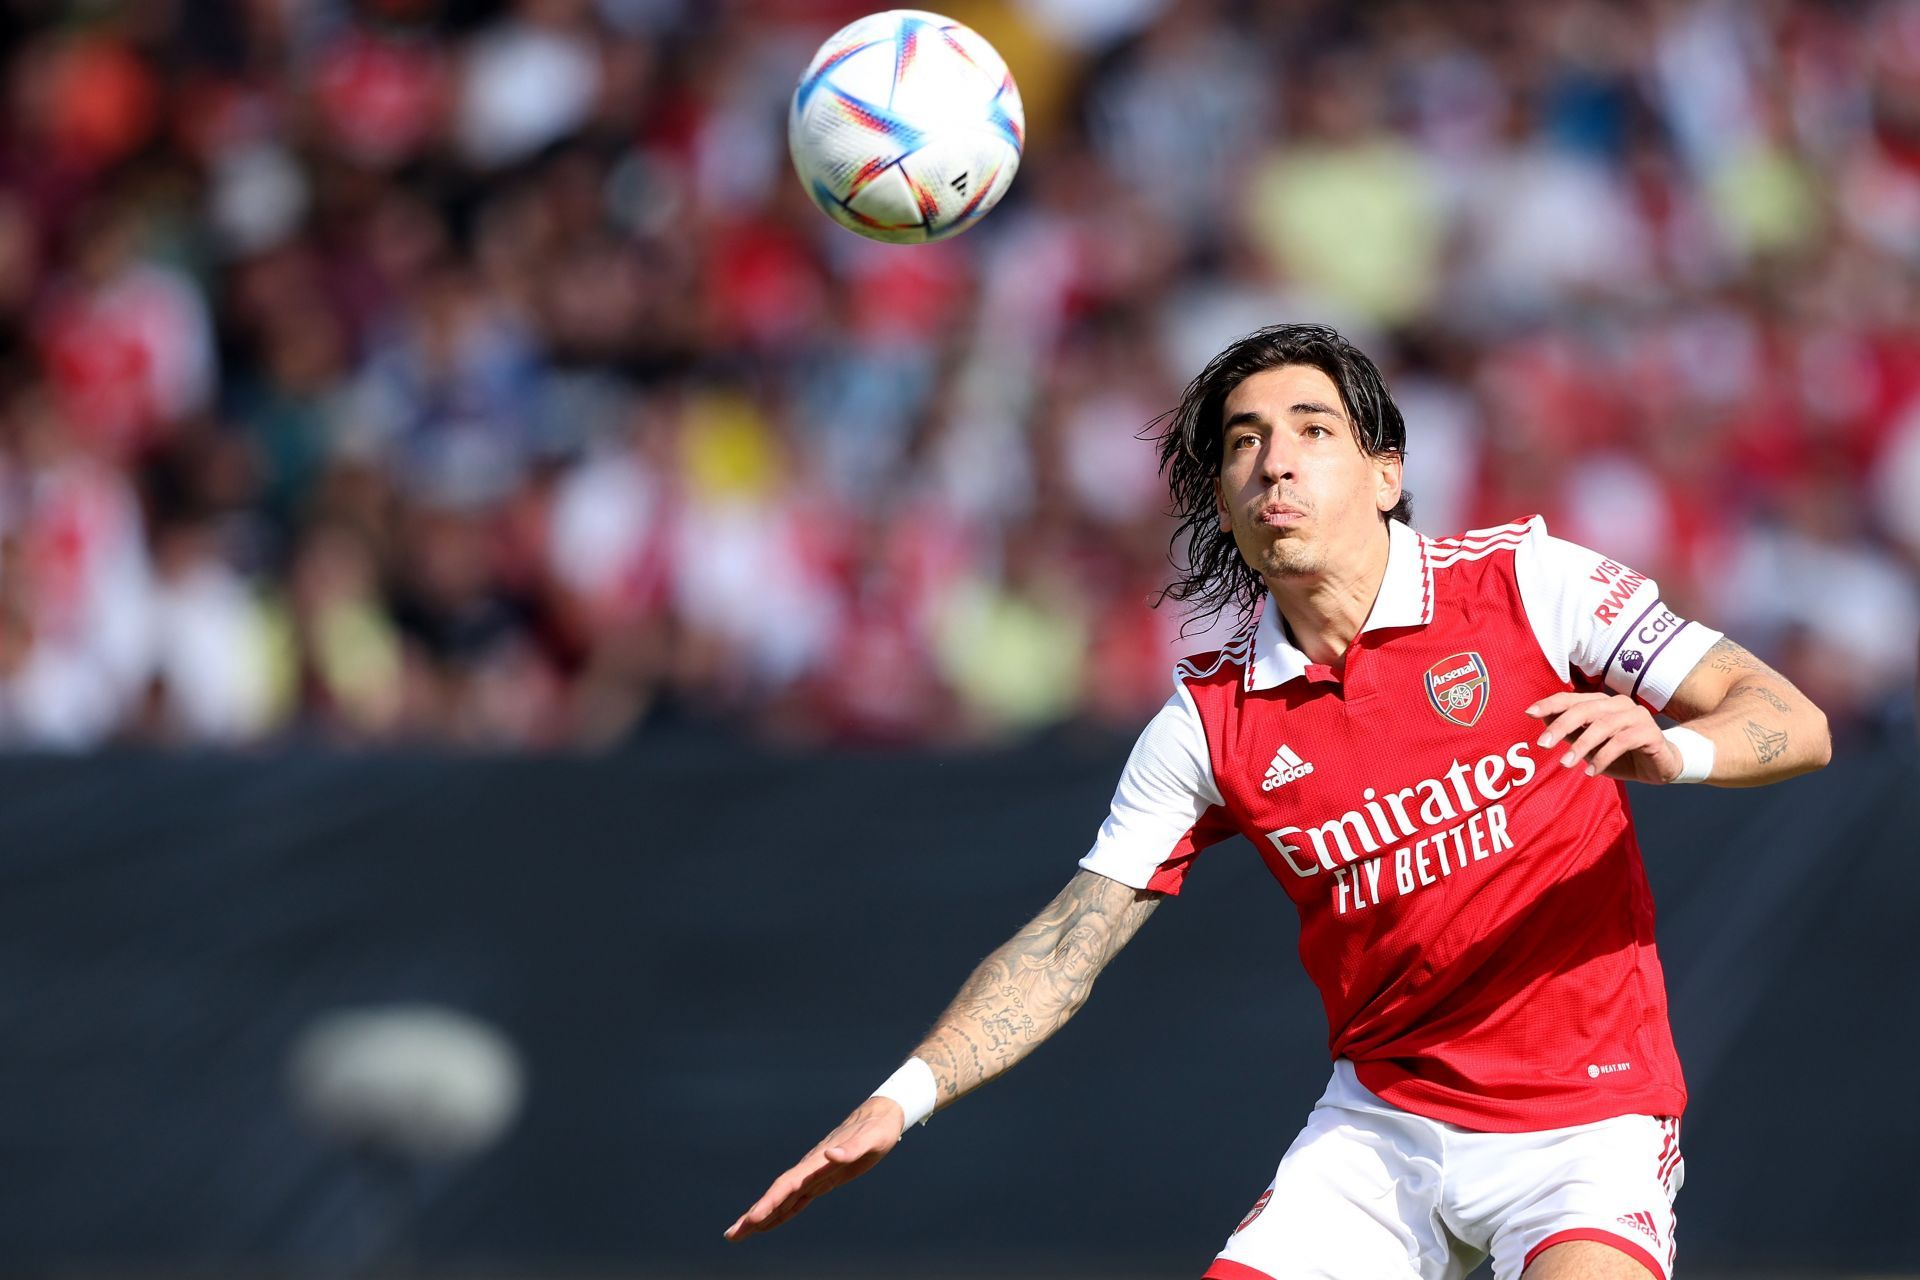 Hector Bellerin has admirers at the Camp Nou.